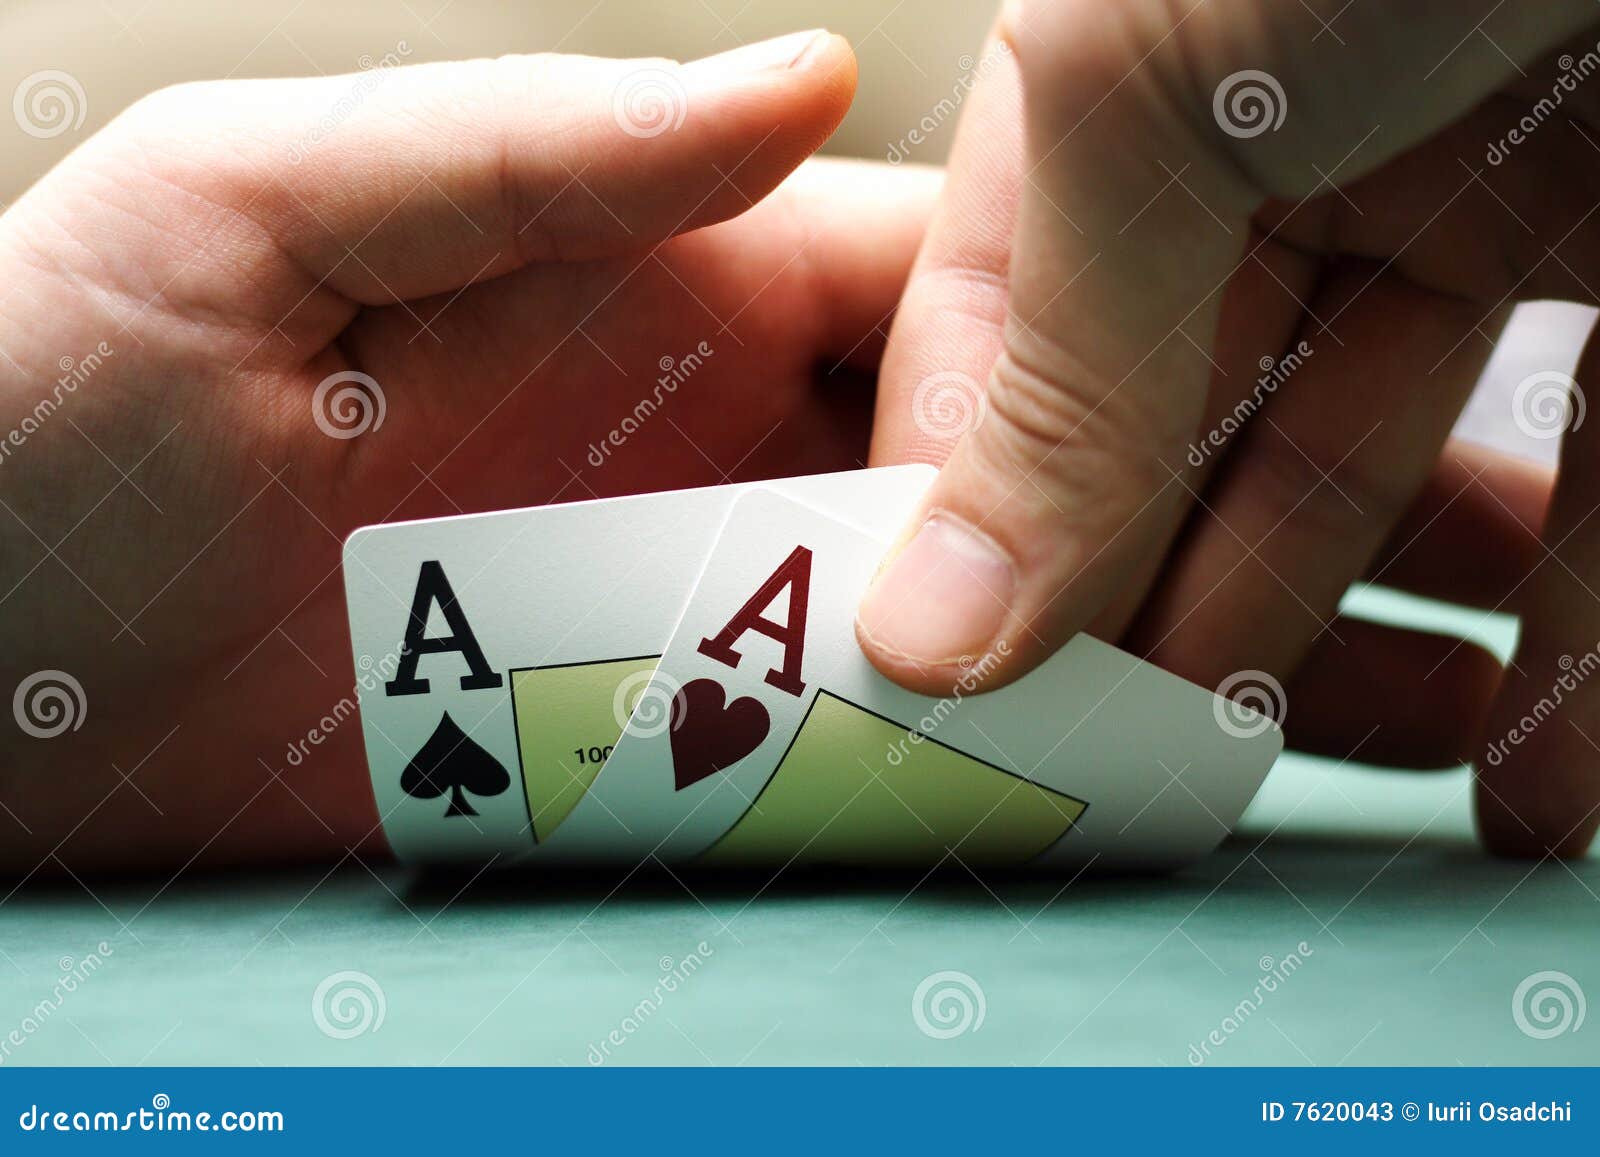 Playing Cards And Chips In Hands Stock Image - Image of chip, felt: 7620043